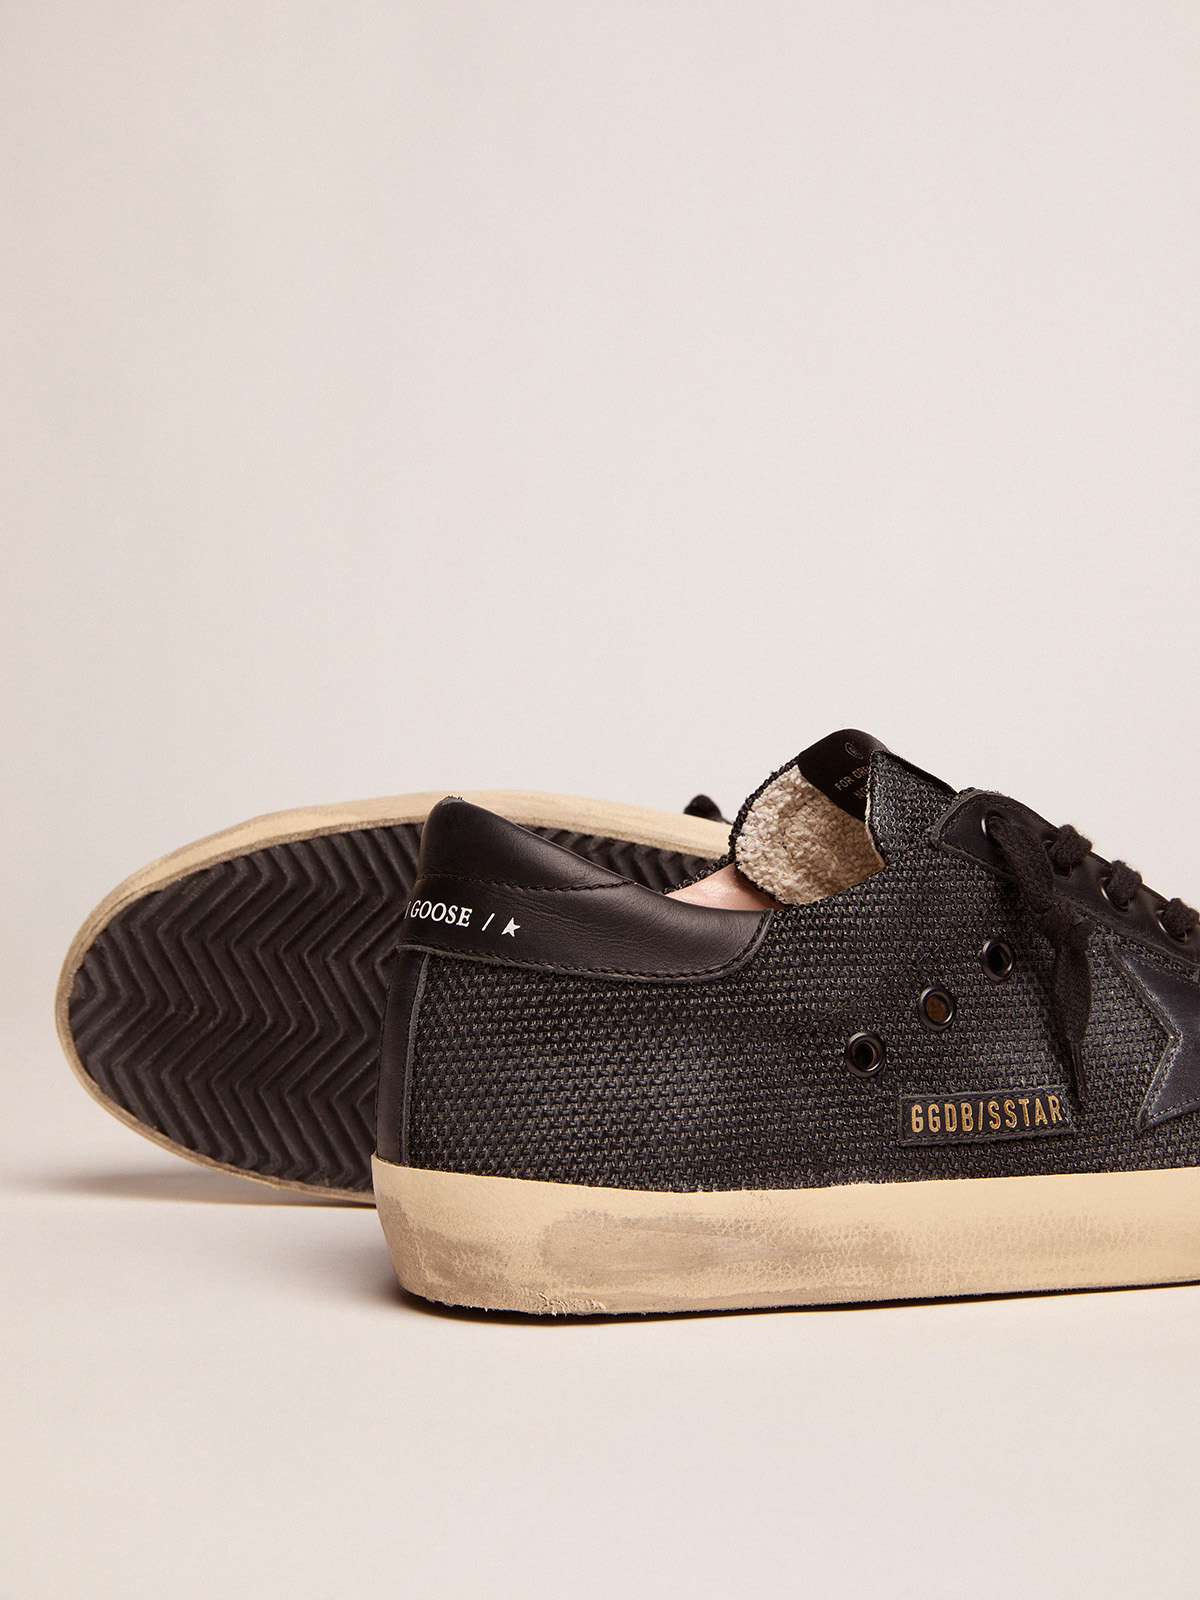 Super-Star Penstar sneakers in black mesh and leather | Golden Goose